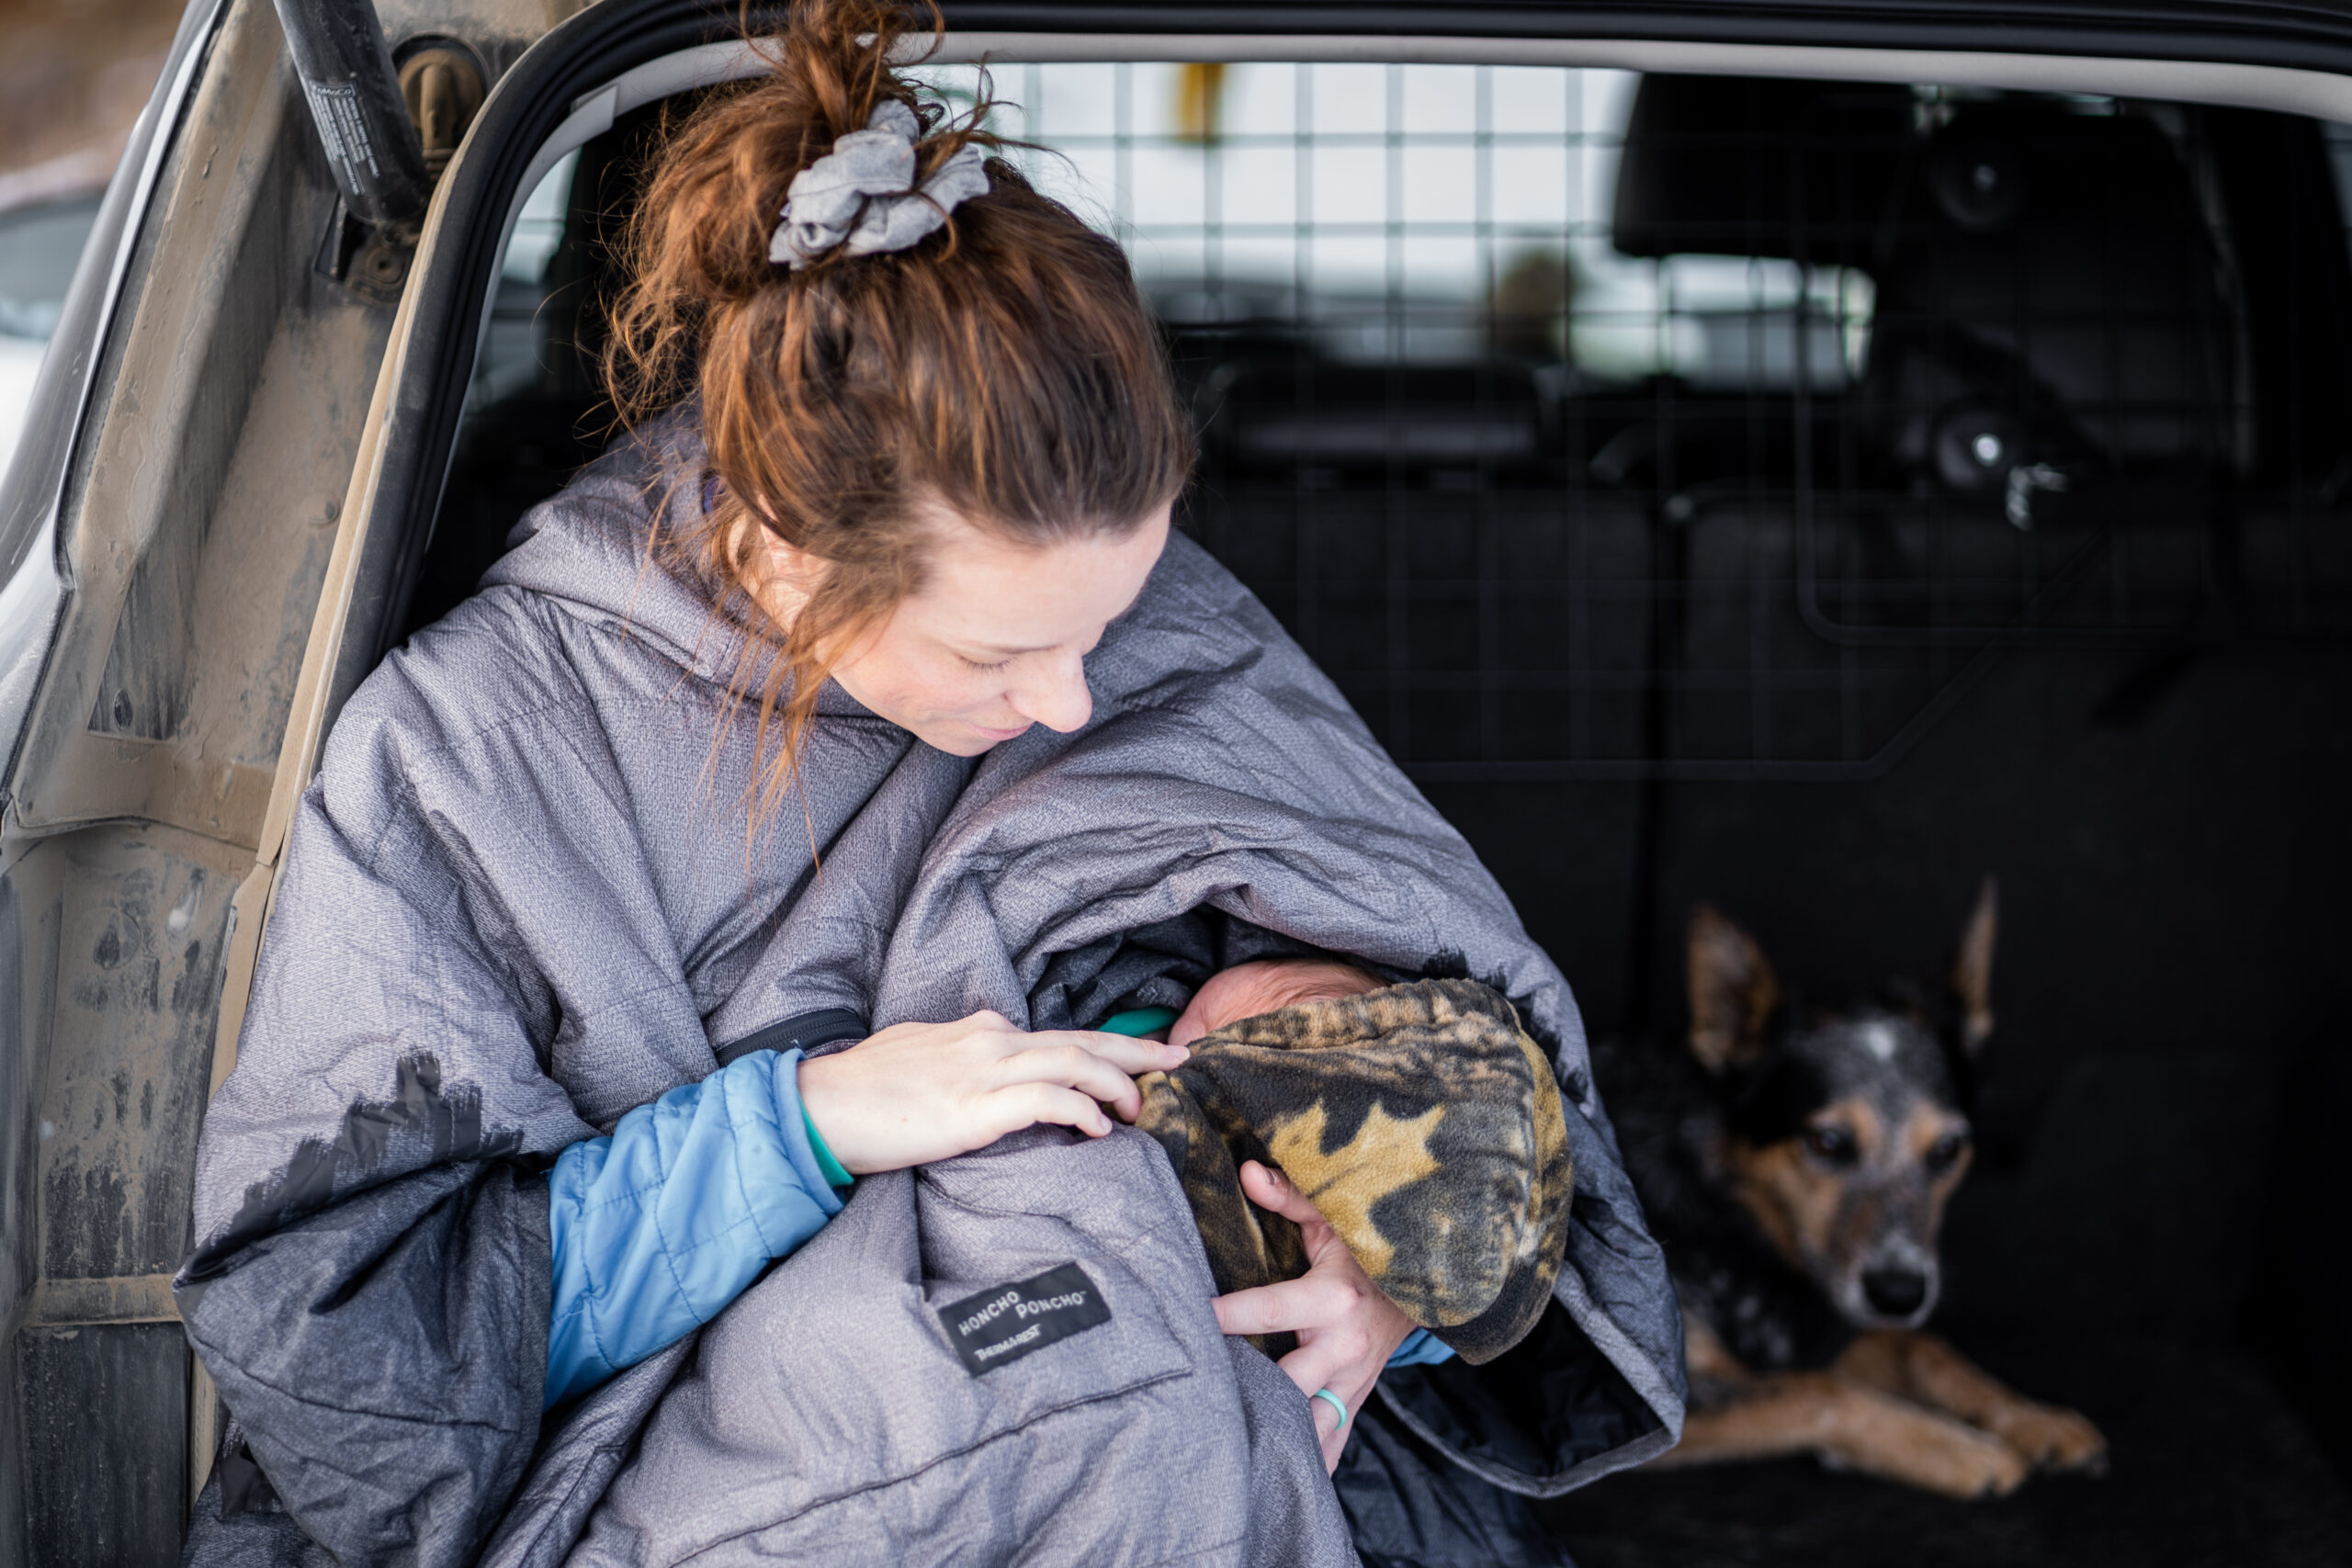 woman wearing a honcho poncho breastfeeds her baby during the winter in the back of the vehicle with her dog beside her before heading out hiking with babies